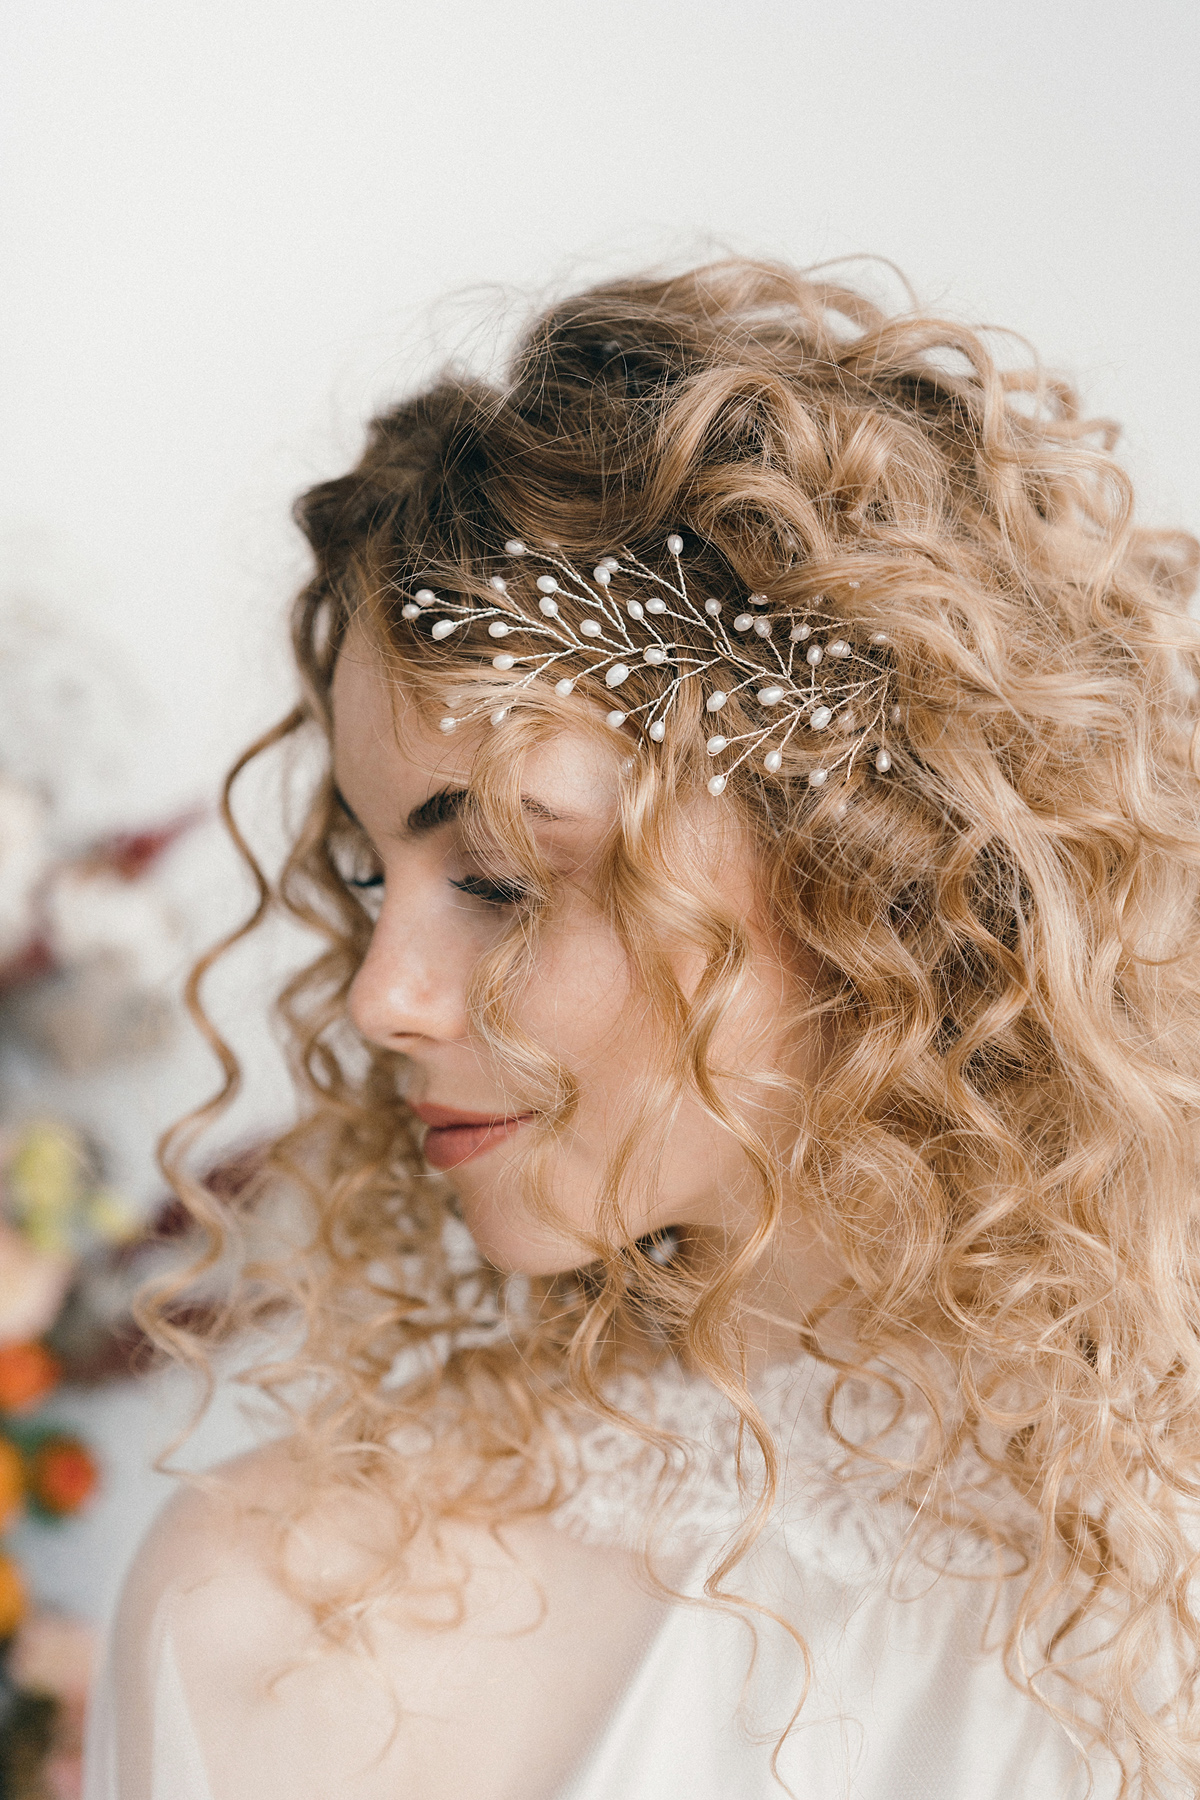 Curly haired bride May hairpin trio set by debbiecarlisle.com £145